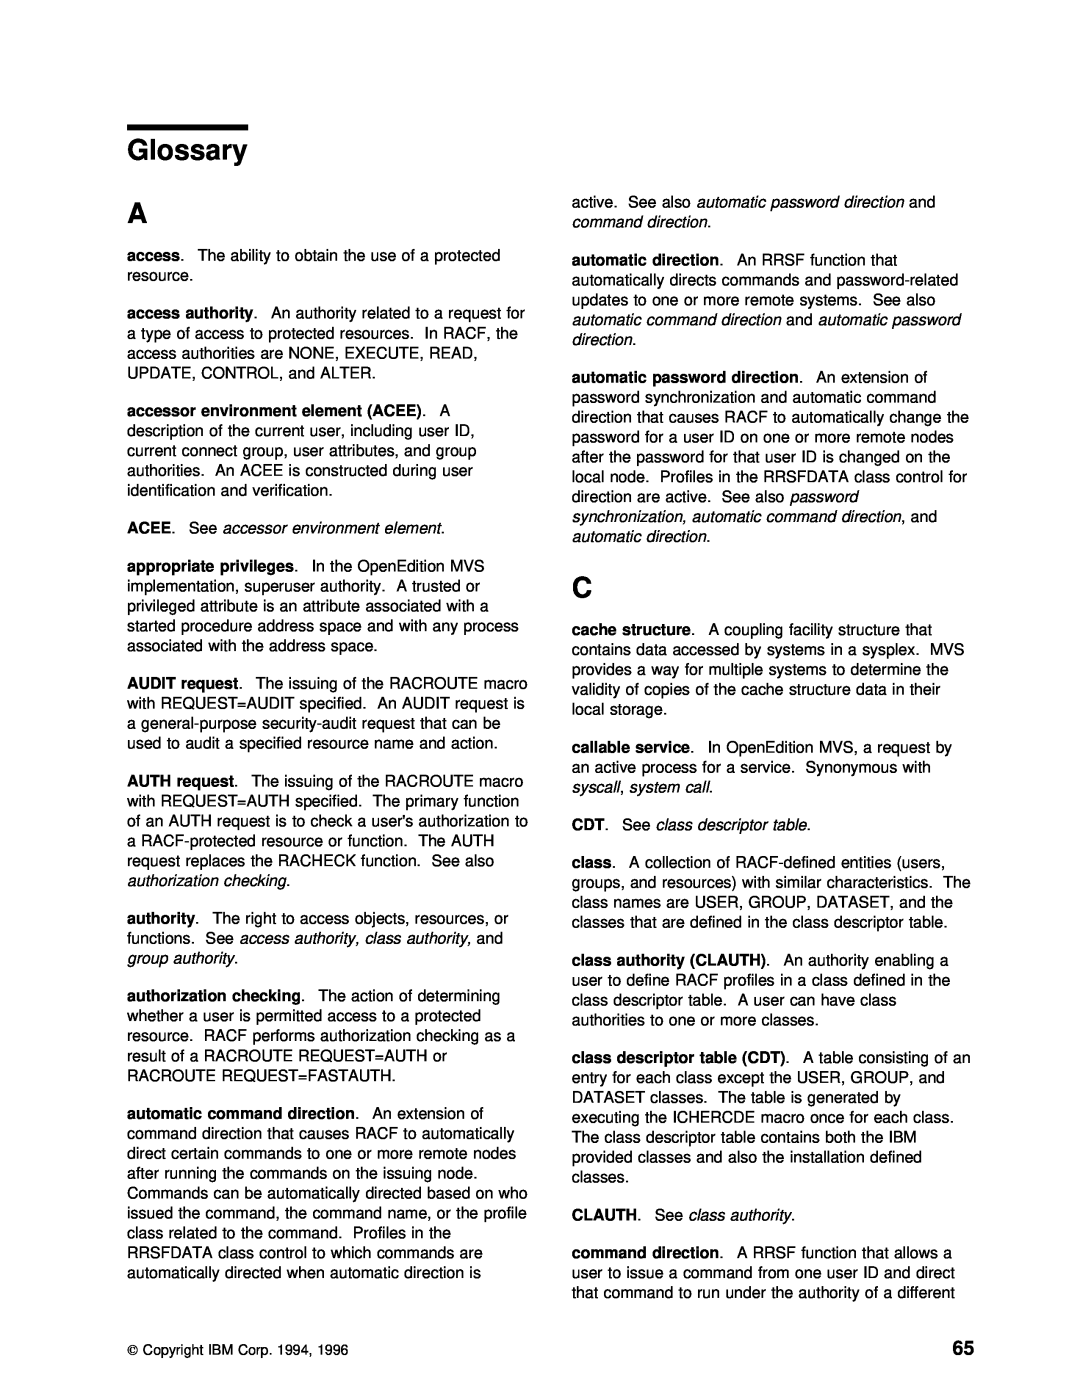 IBM GC28-1920-01 manual Glossary, direction, access 